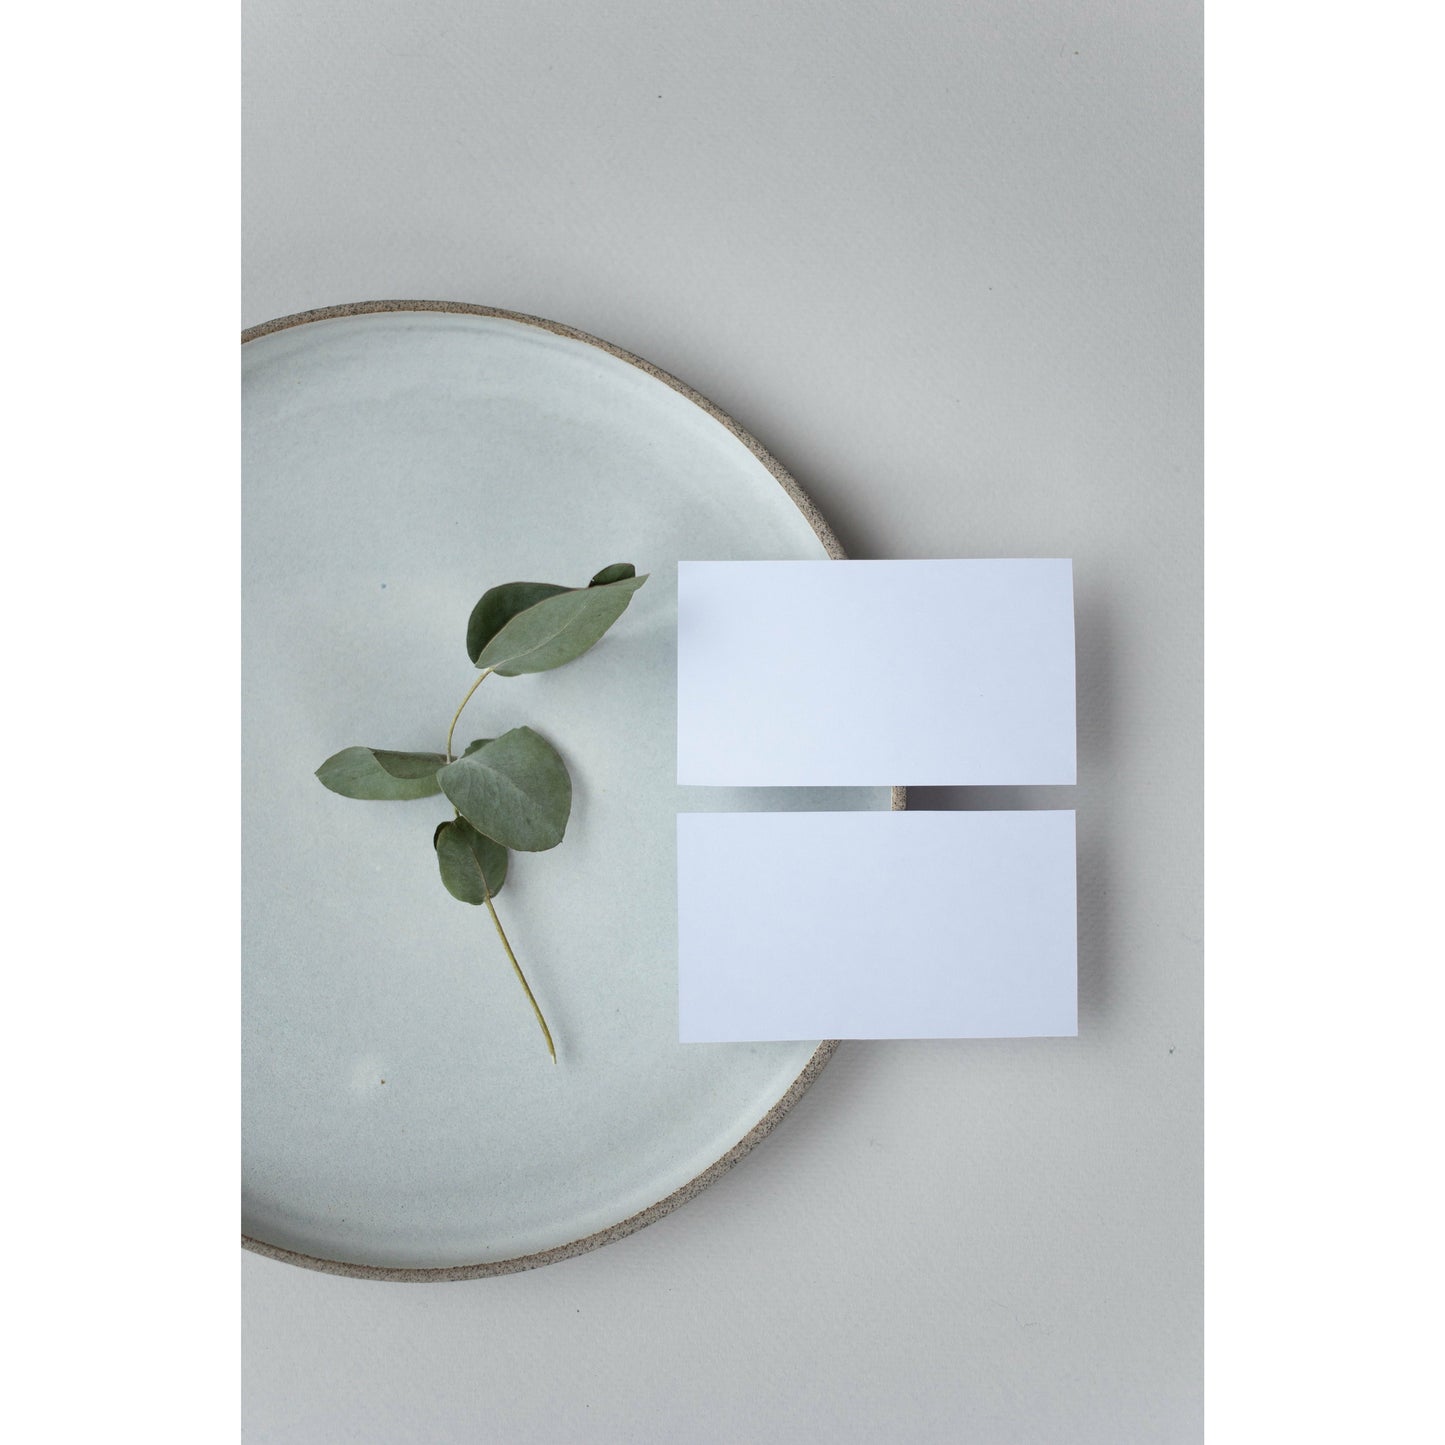 White Smooth Card 400gsm Pack of 20 Sheets Choose Size